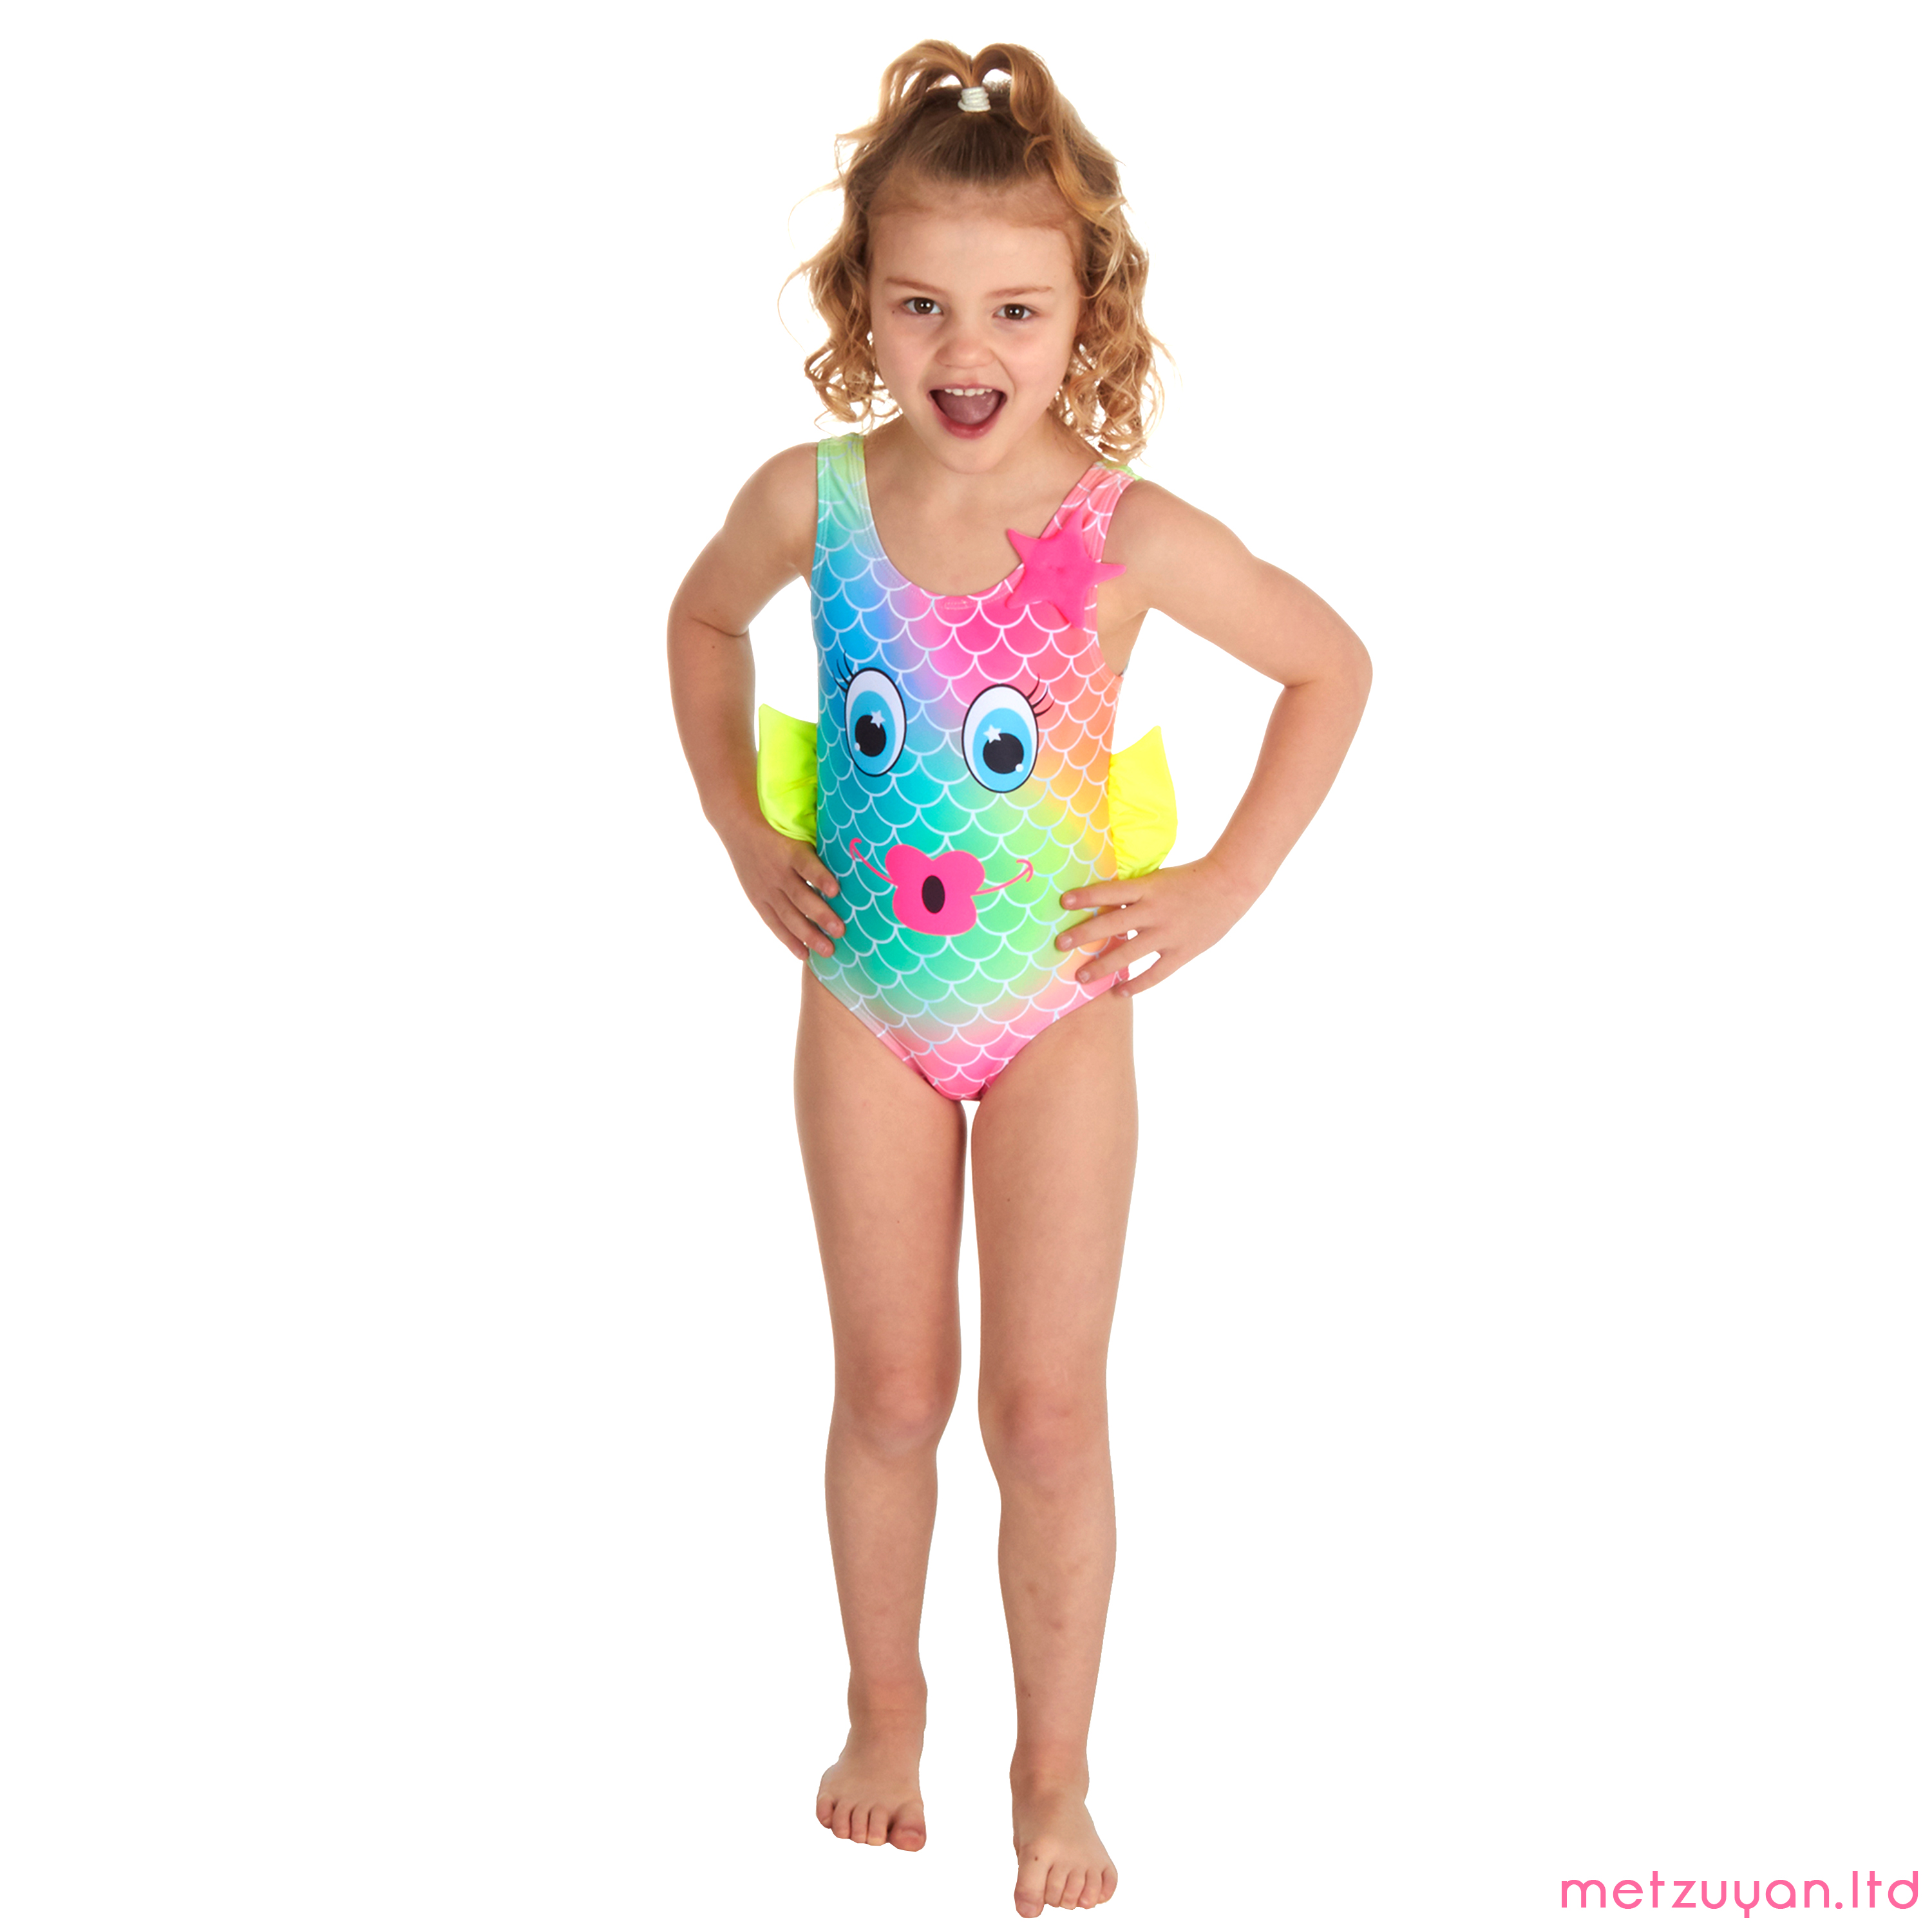 One-Piece Swimsuits For Teens and Tweens 2017